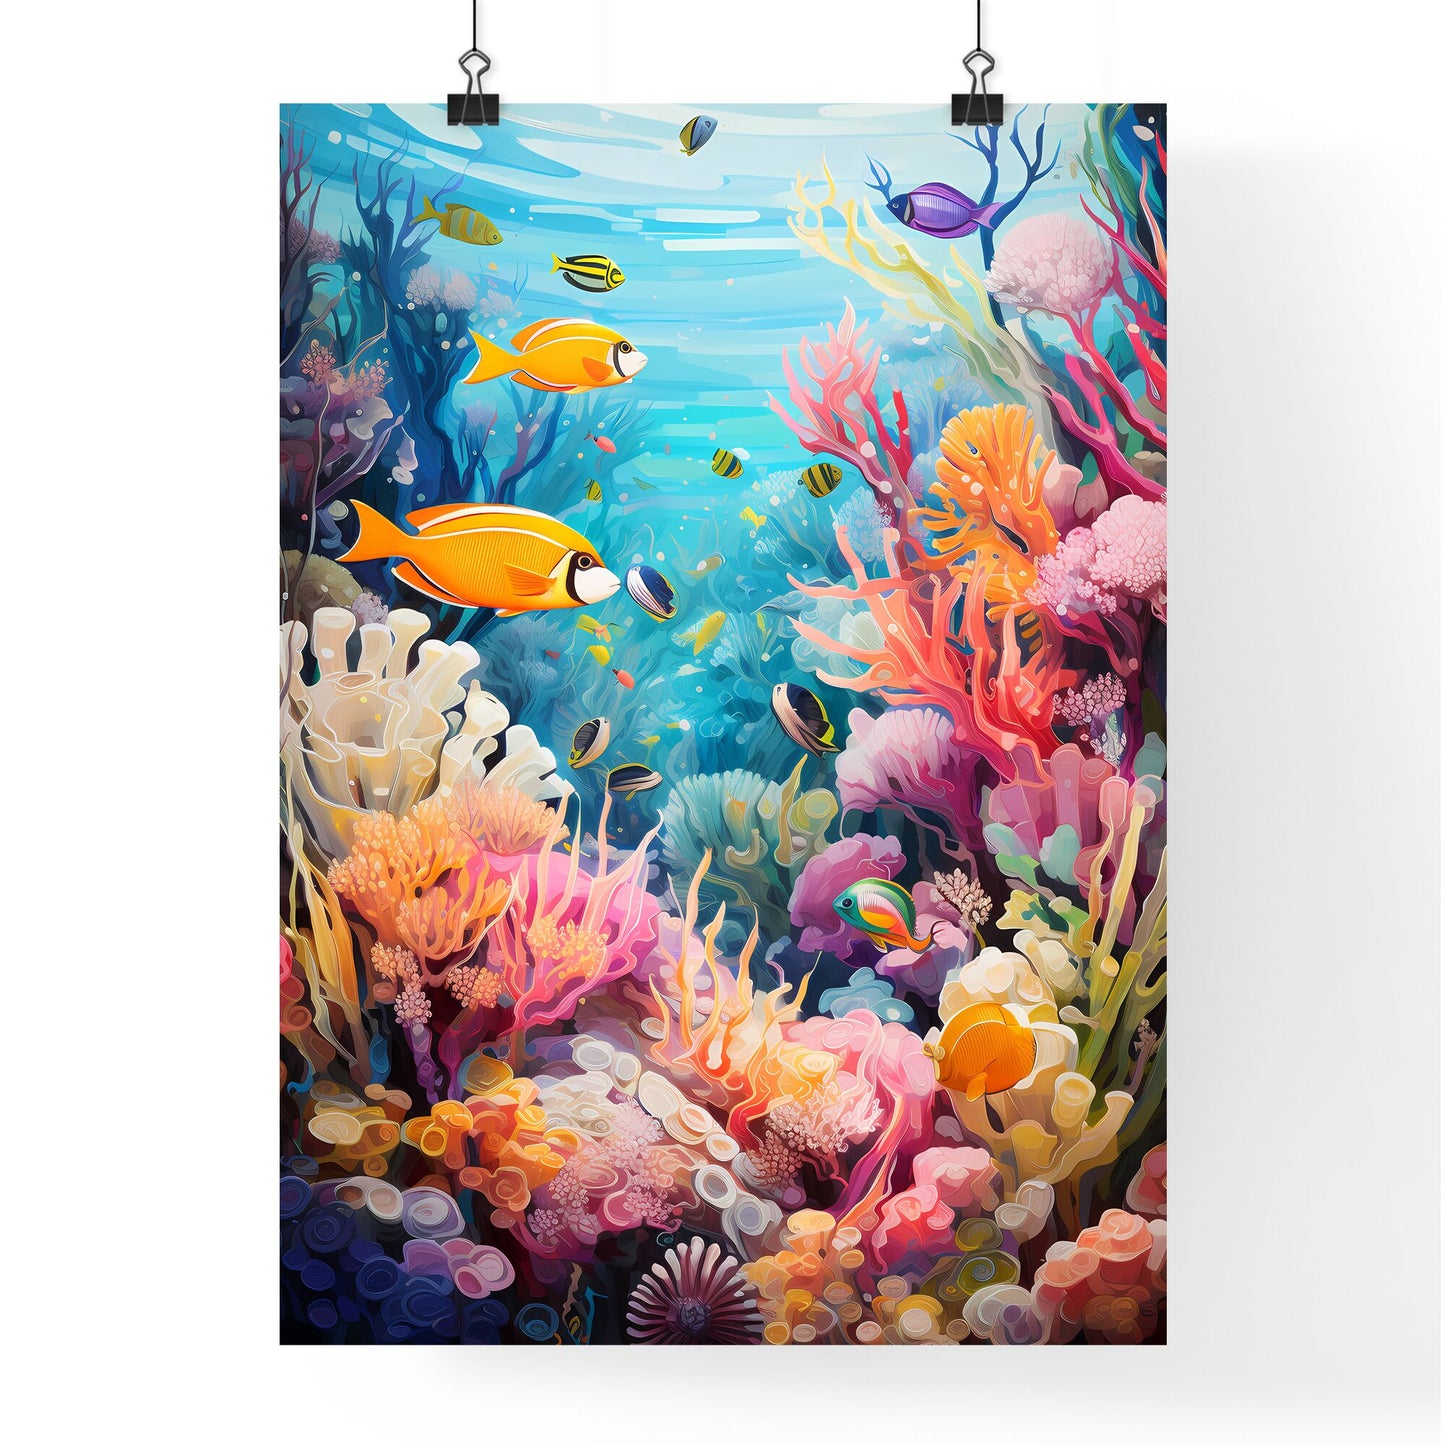 Colourful Coral Reef Deep Underwater - A Colorful Underwater Scene With Fish And Corals Default Title